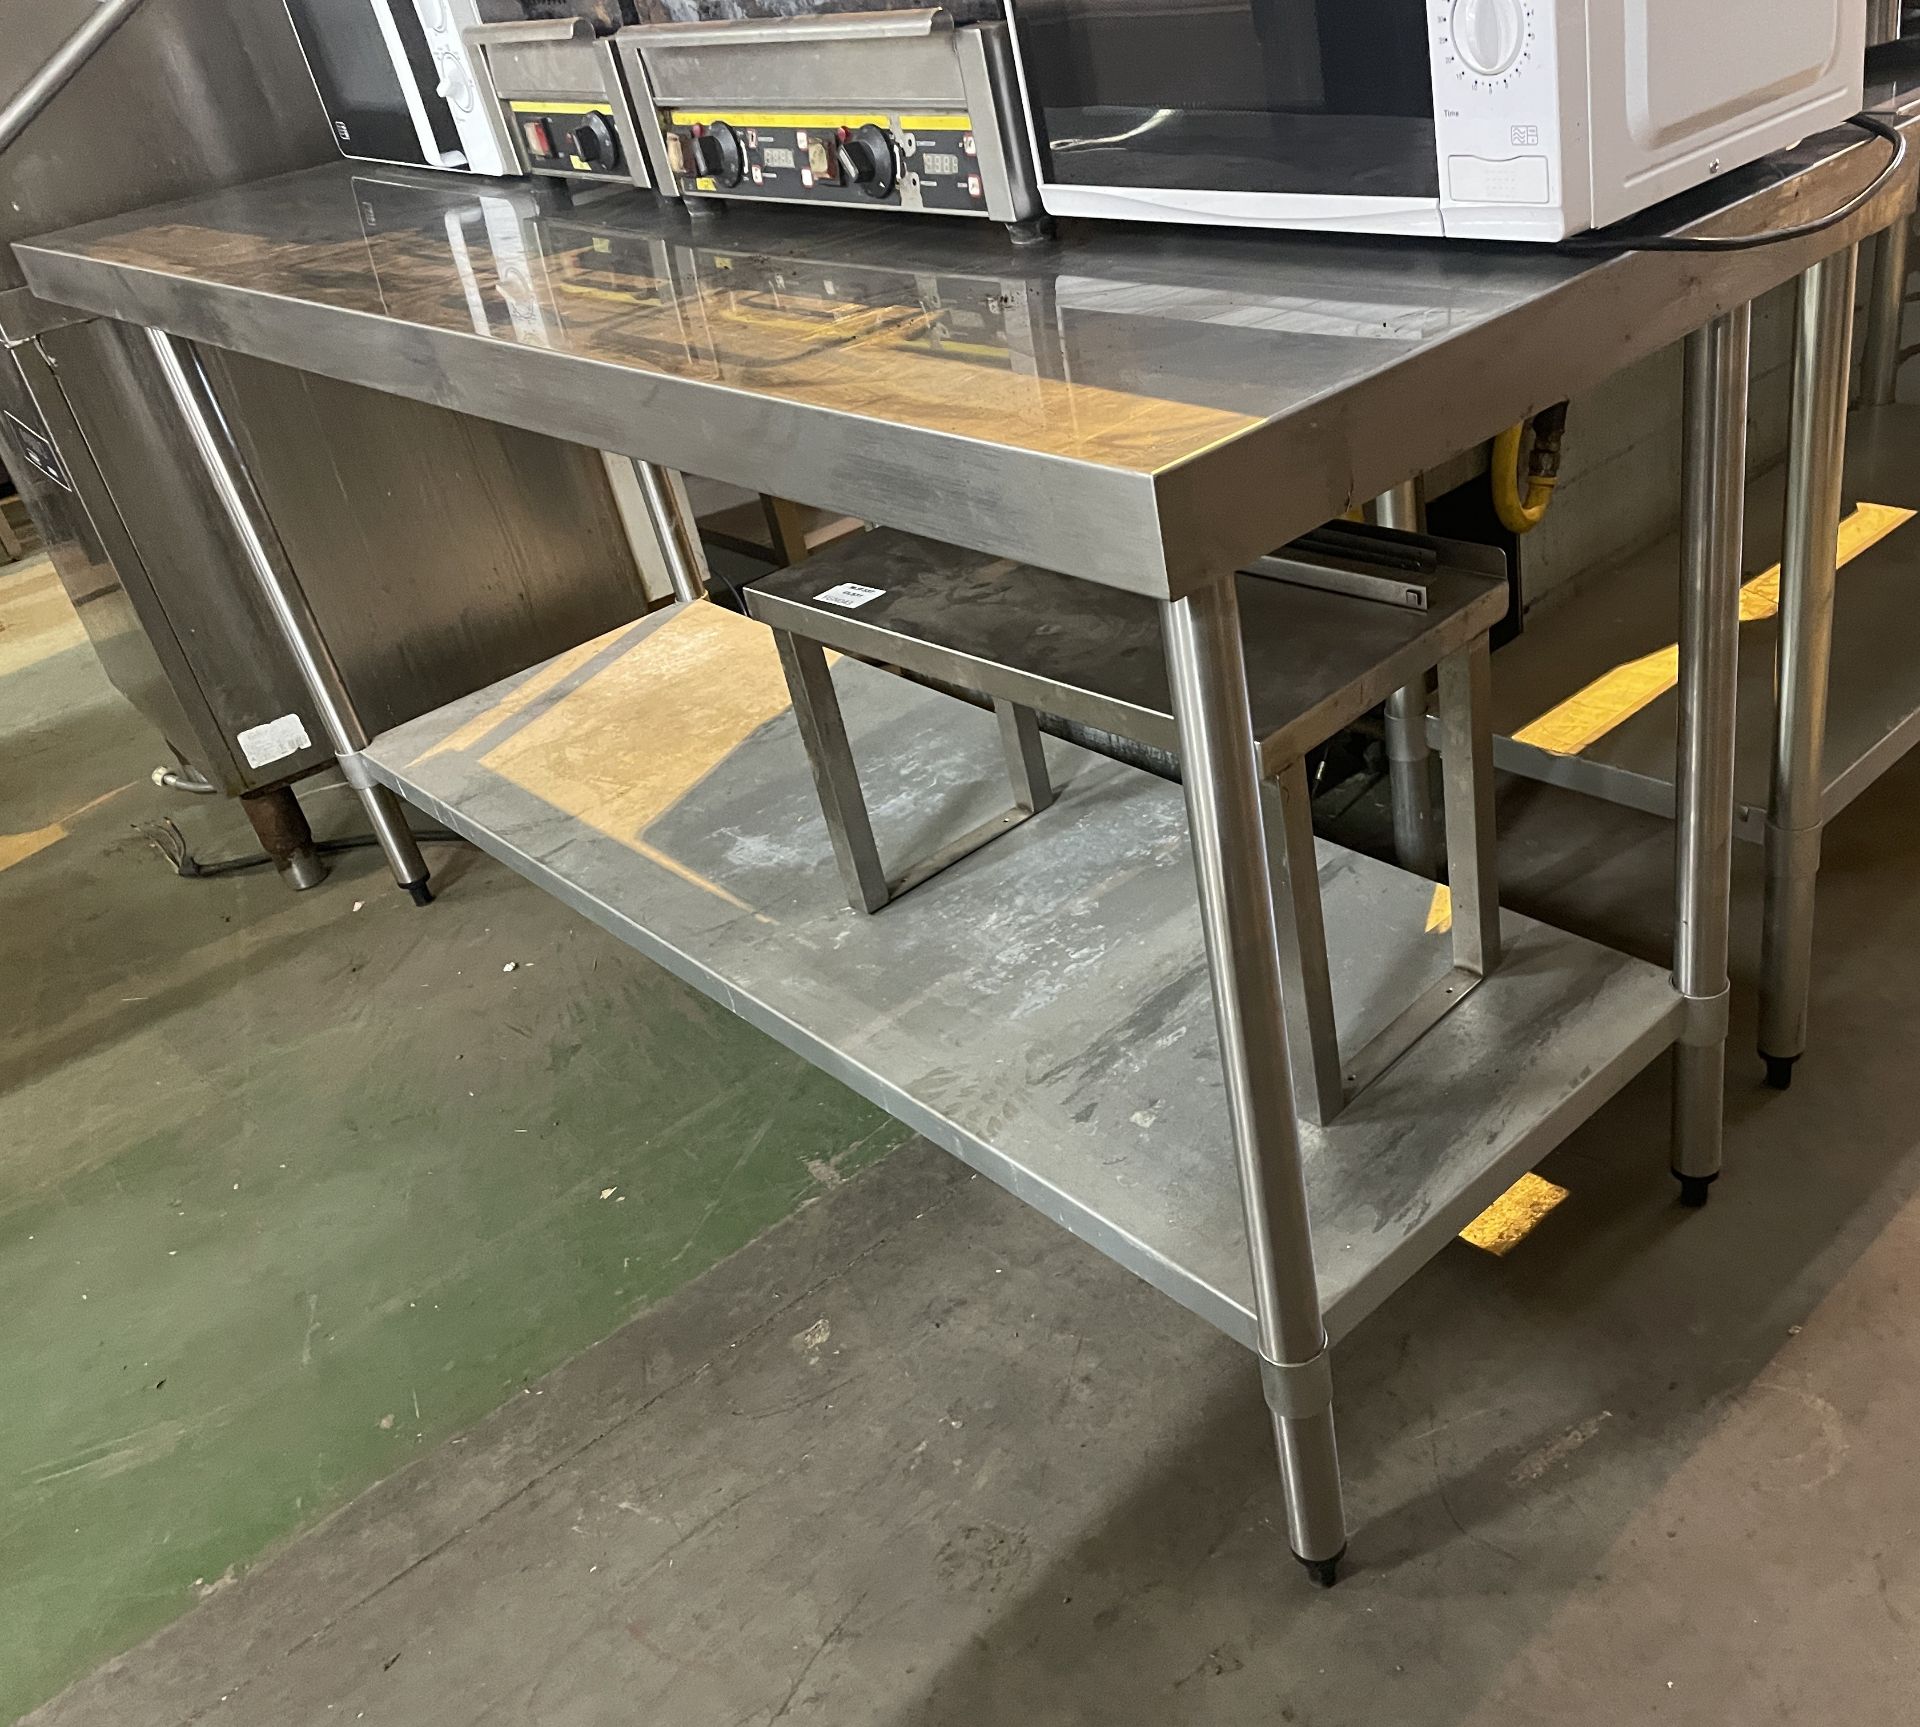 1 x Stainless Steel Prep Table With Undershelf - Image 2 of 2